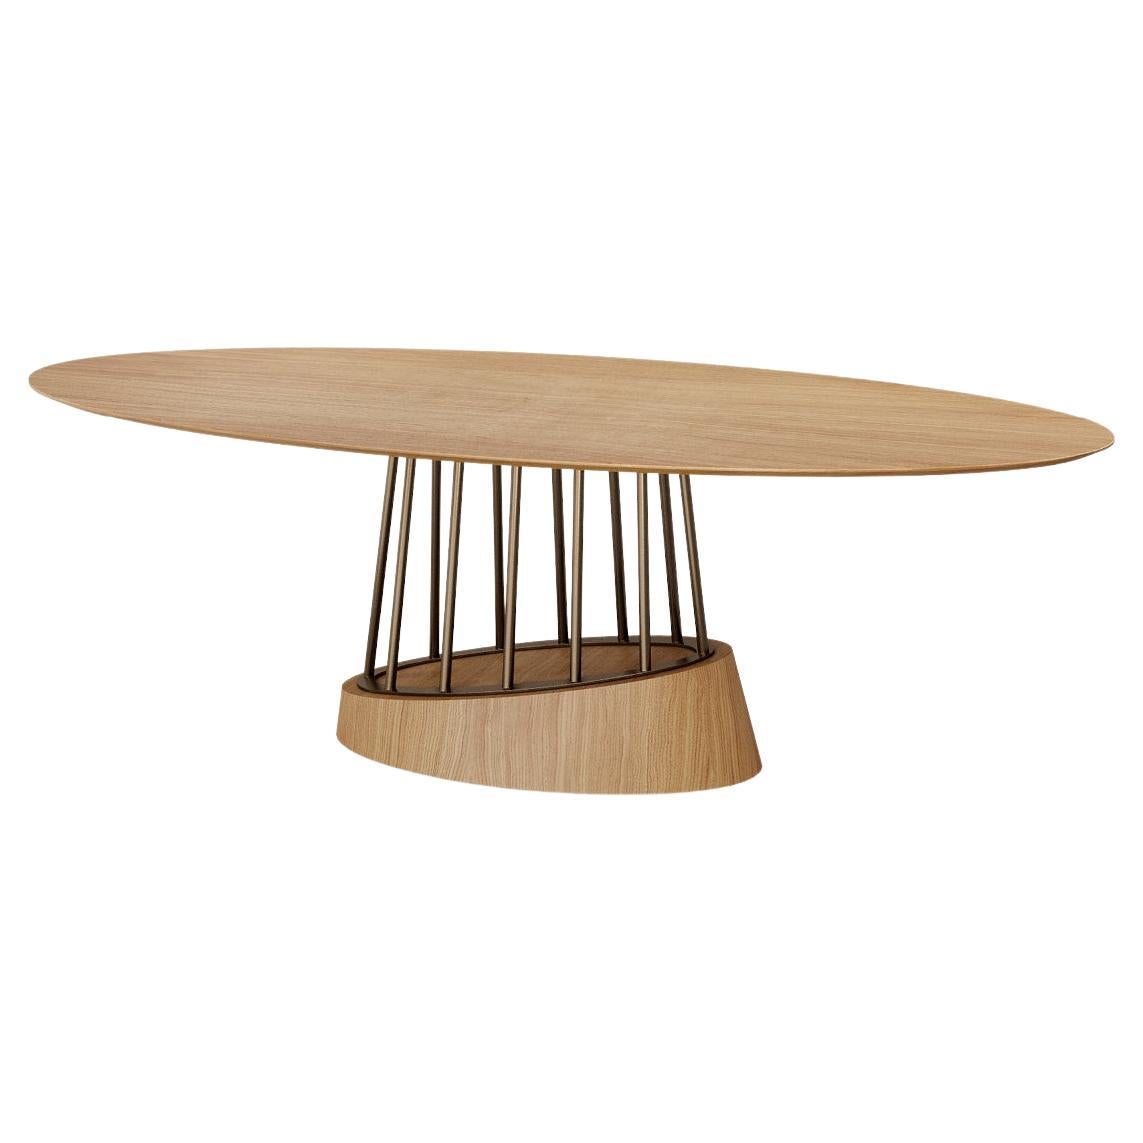 ZAGAS Elipse Dining Table